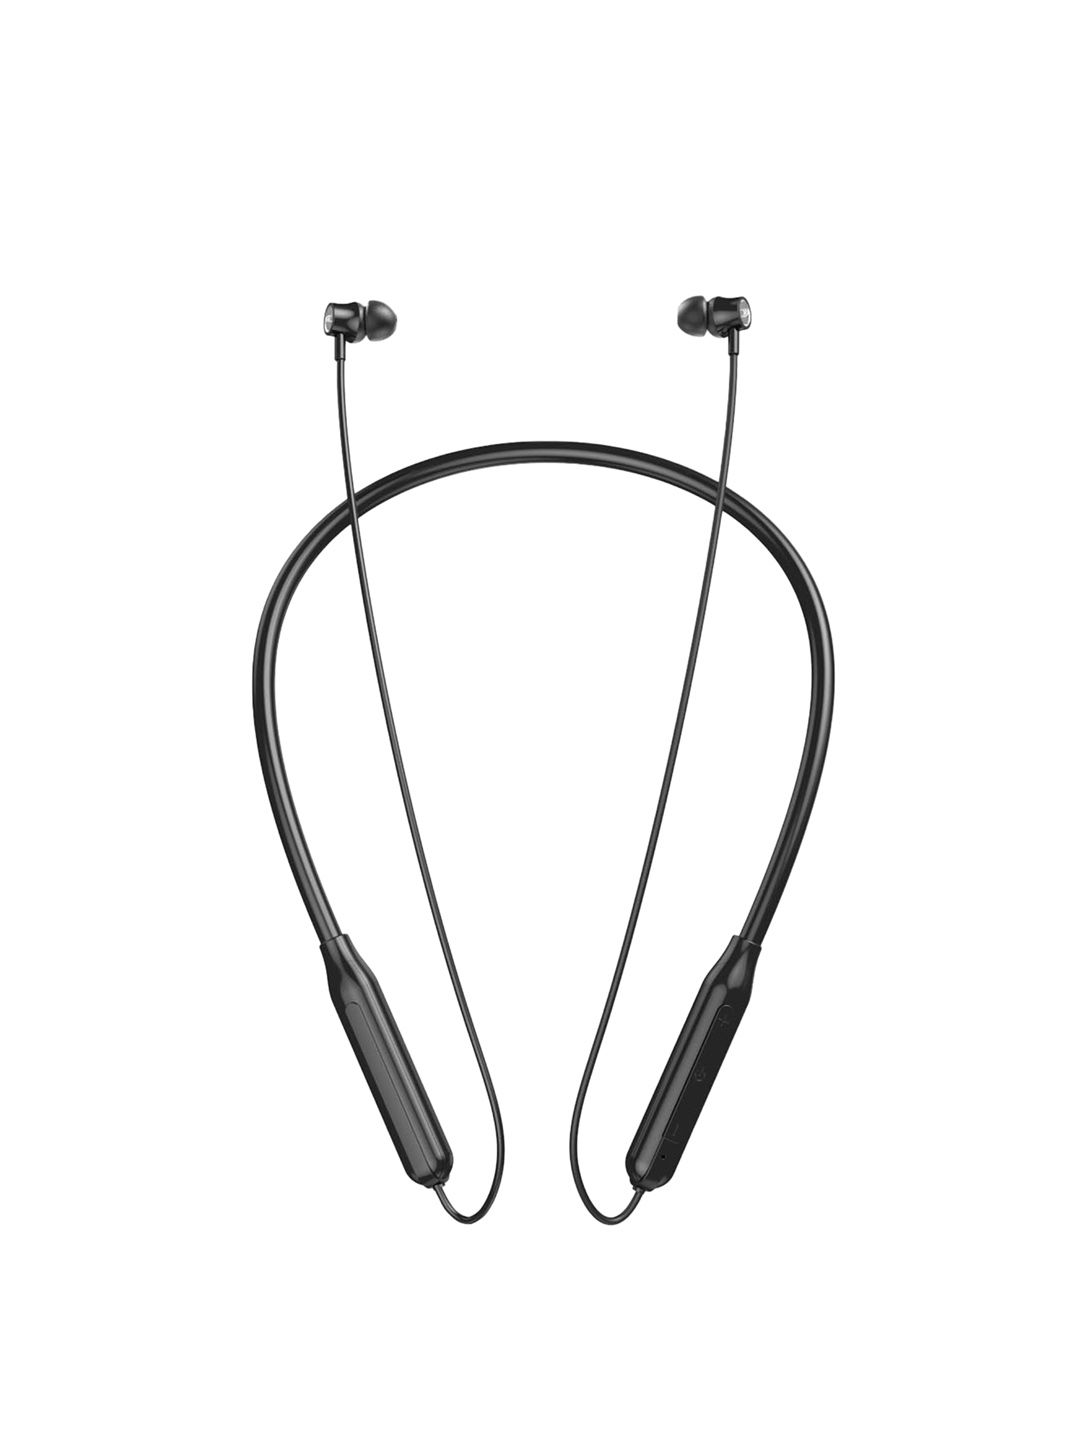 Cellecor Black Solid NK-3 Wireless Bluetooth Earphone Neckband Price in India